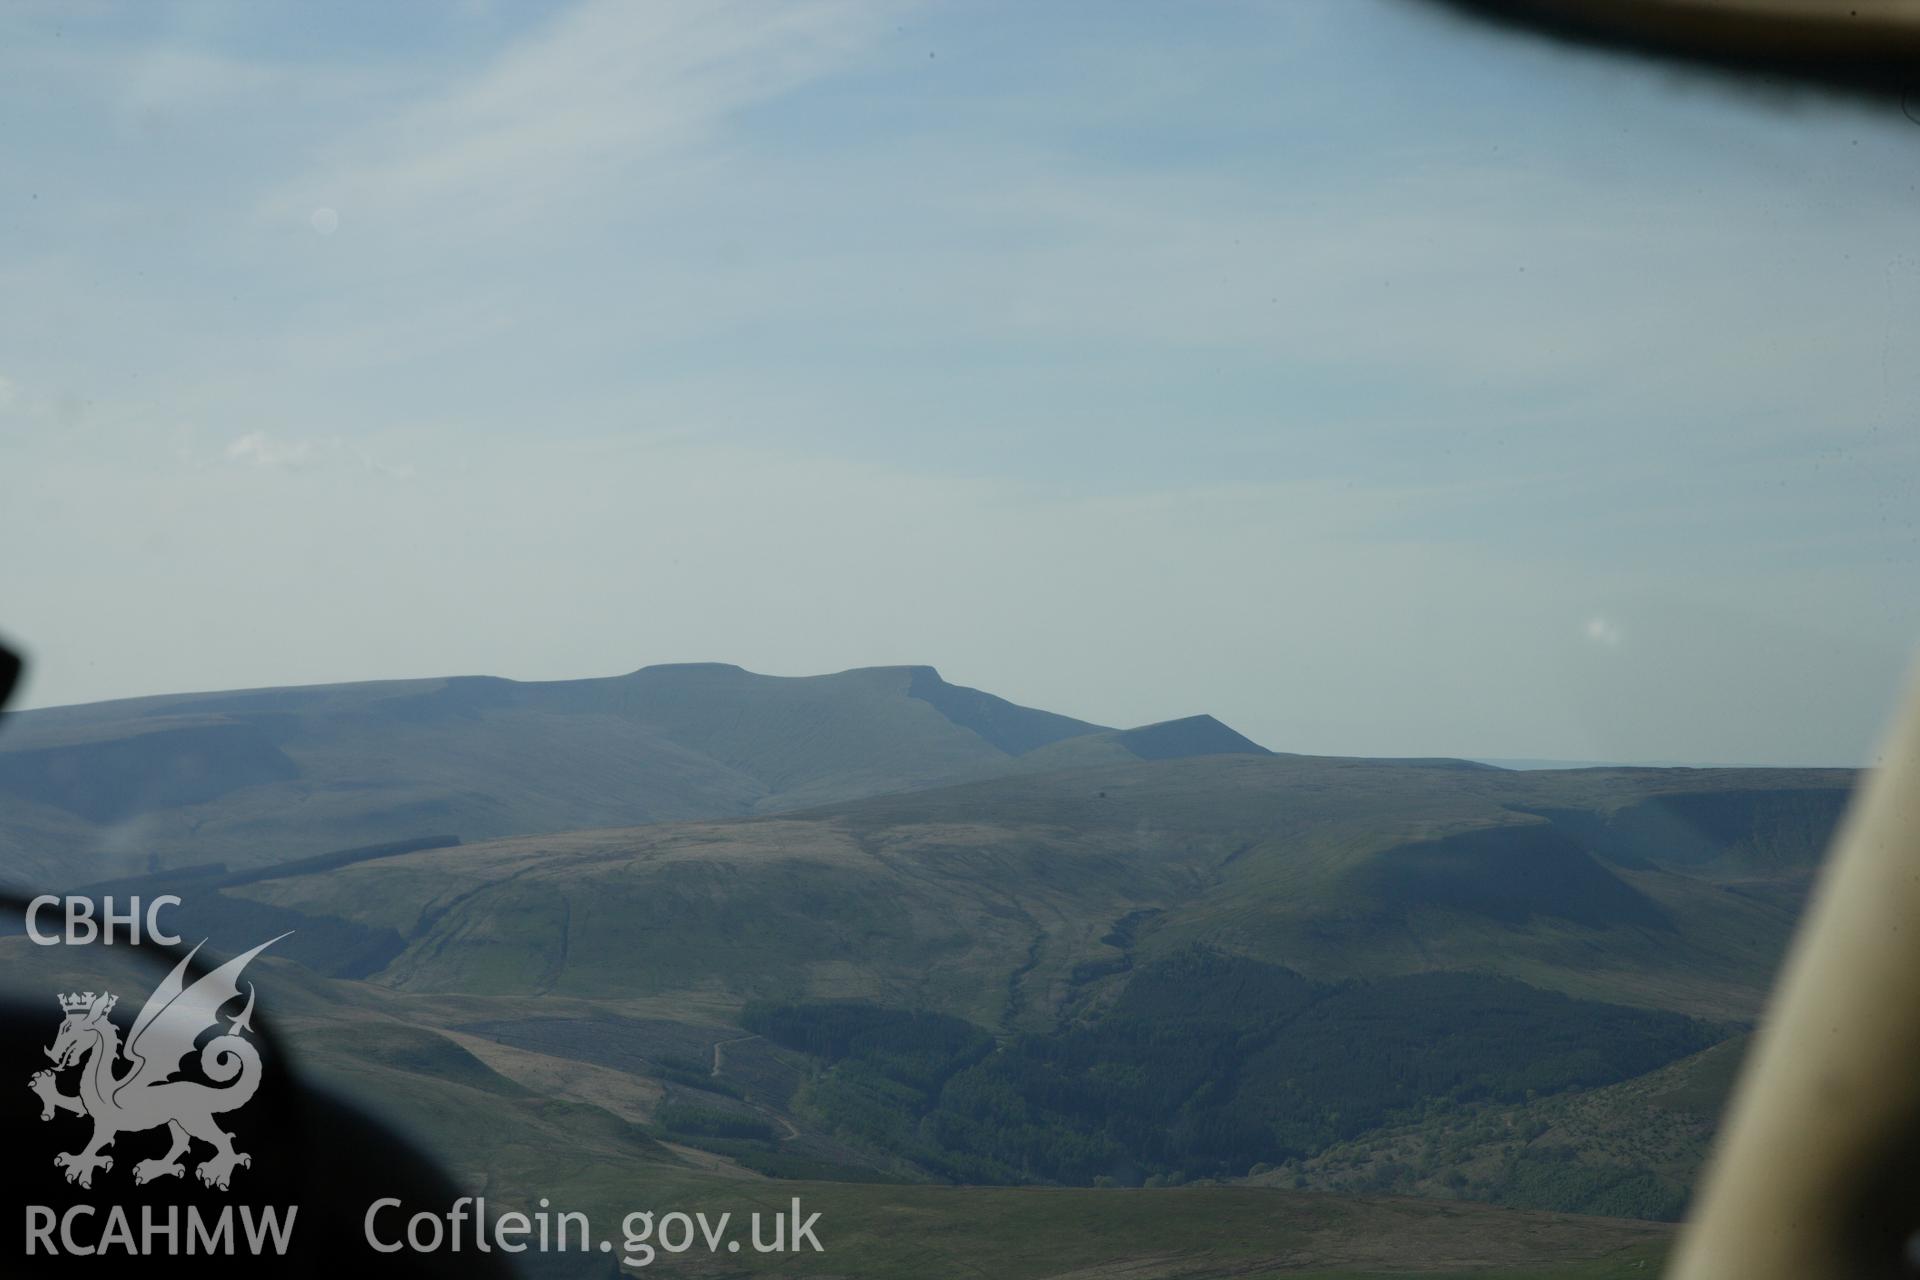 RCAHMW colour oblique photograph of Brecon Beacons (distant view), photographed from the south-east in transit over Pontsticill Reservoir (SO 0513). Taken by Toby Driver on 22/05/2012.